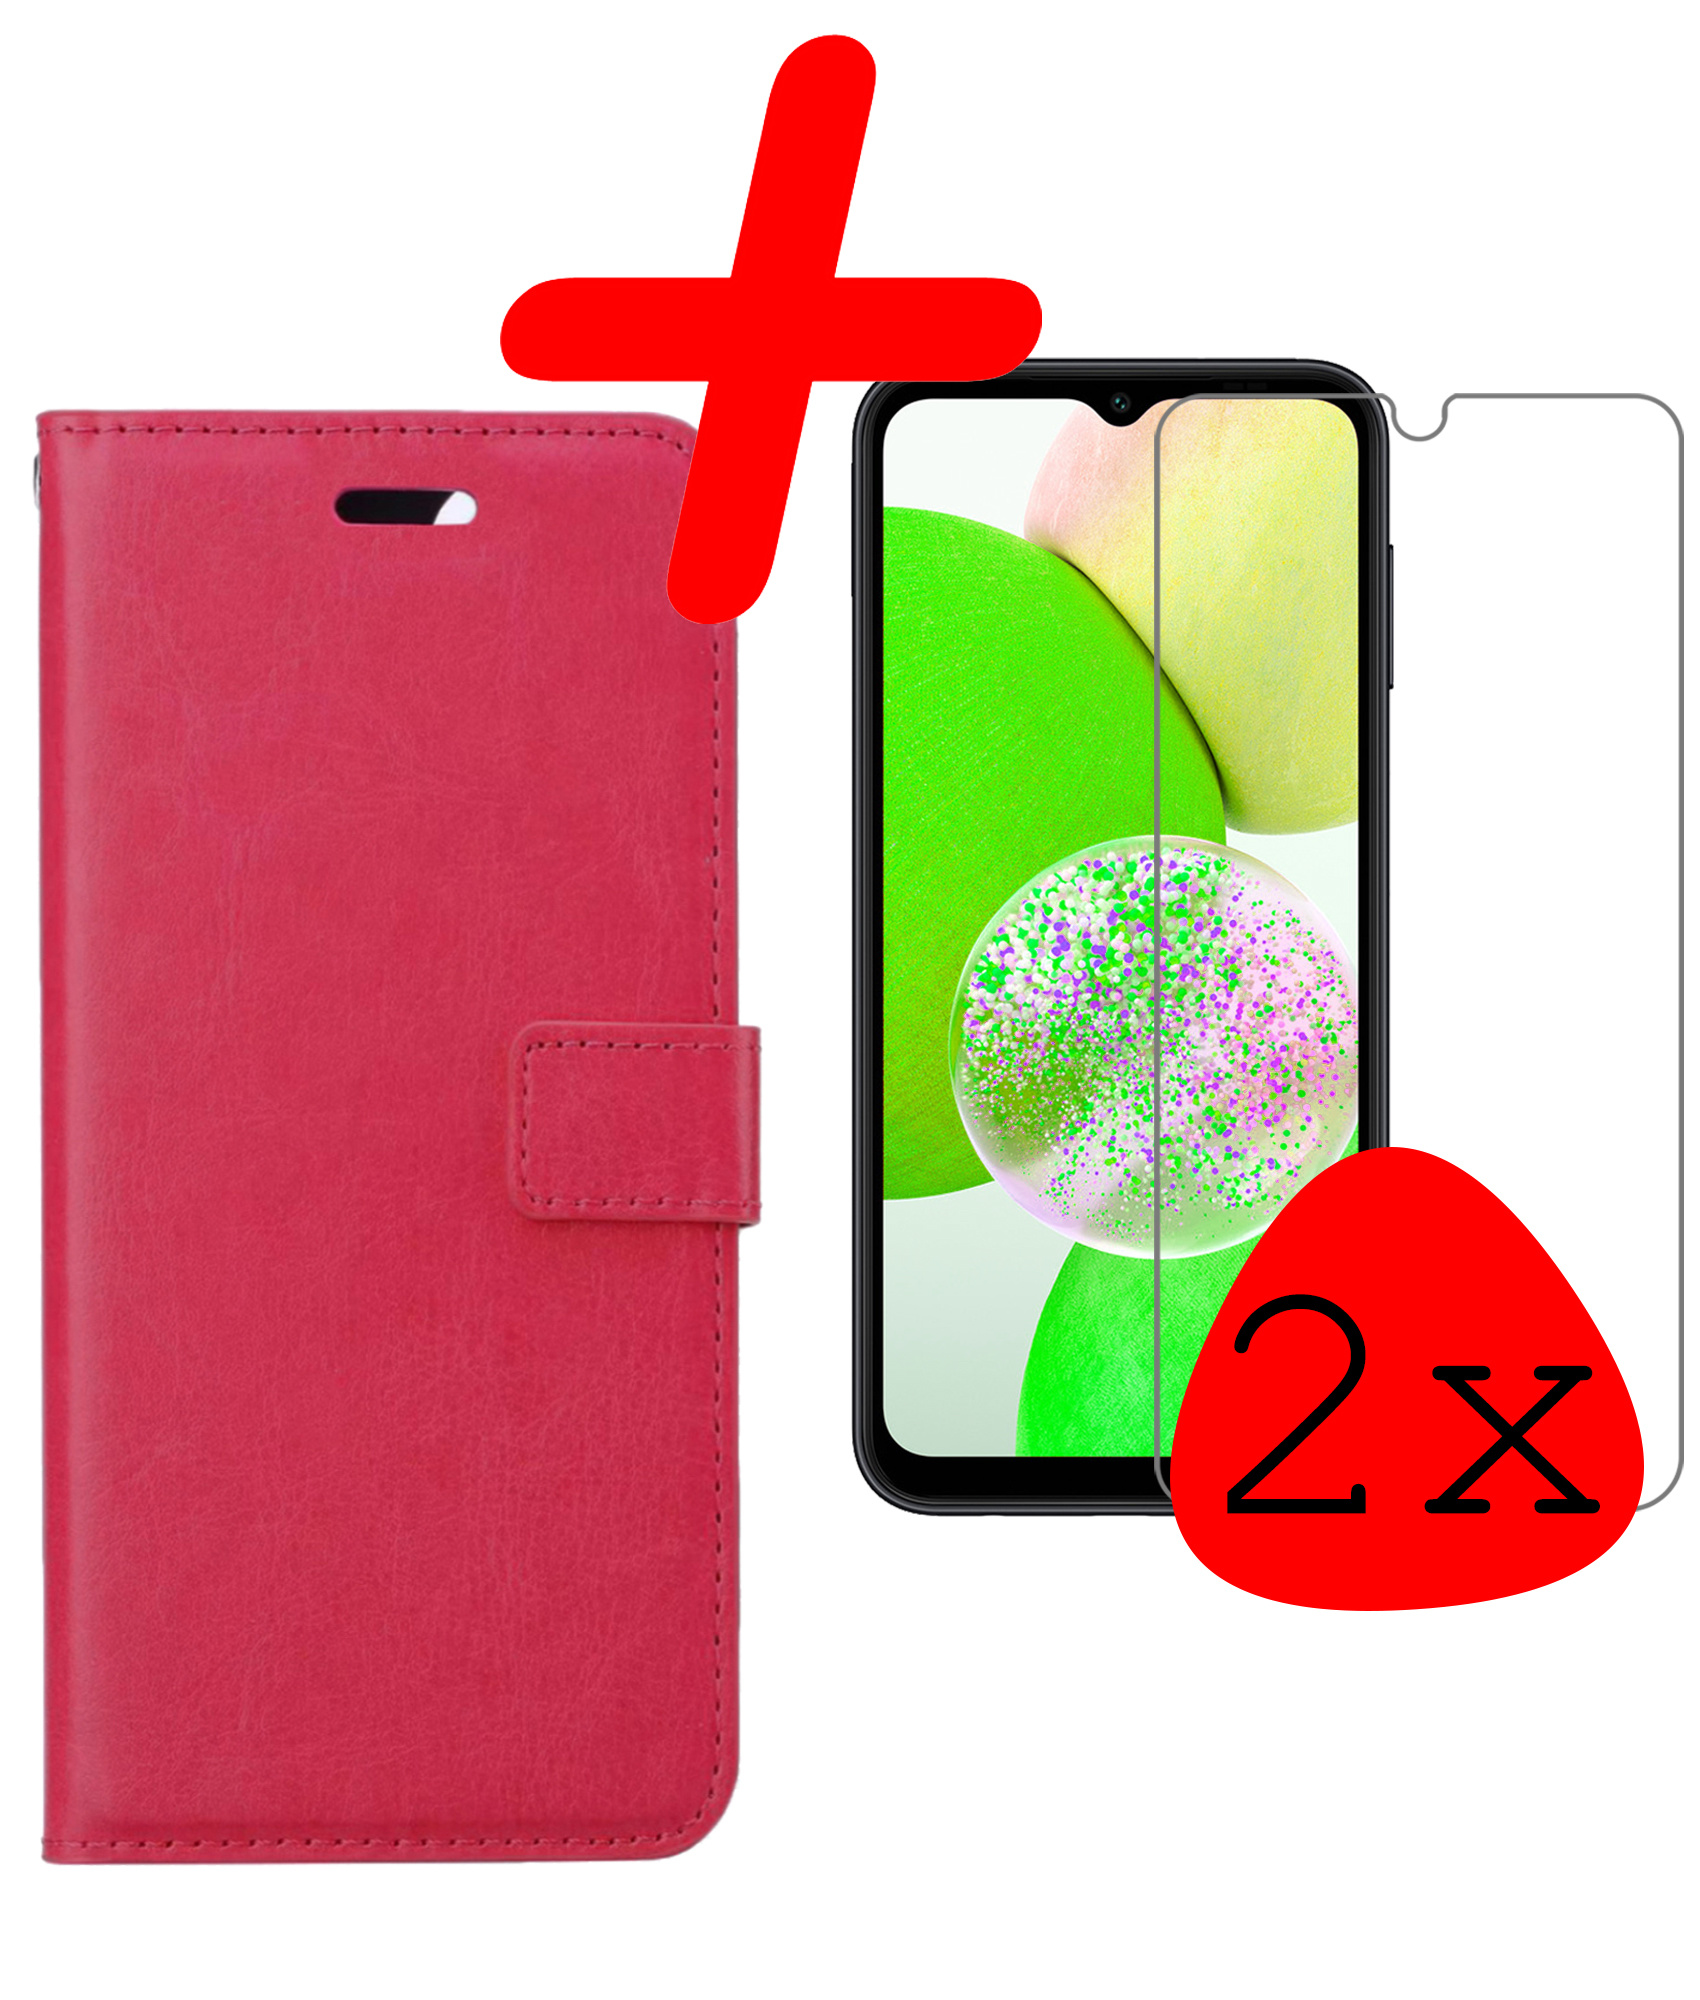 Samsung Galaxy A14 Hoesje Bookcase Hoes Flip Case Book Cover 2x Met Screenprotector - Samsung A14 Hoes Book Case Hoesje - Donkerroze